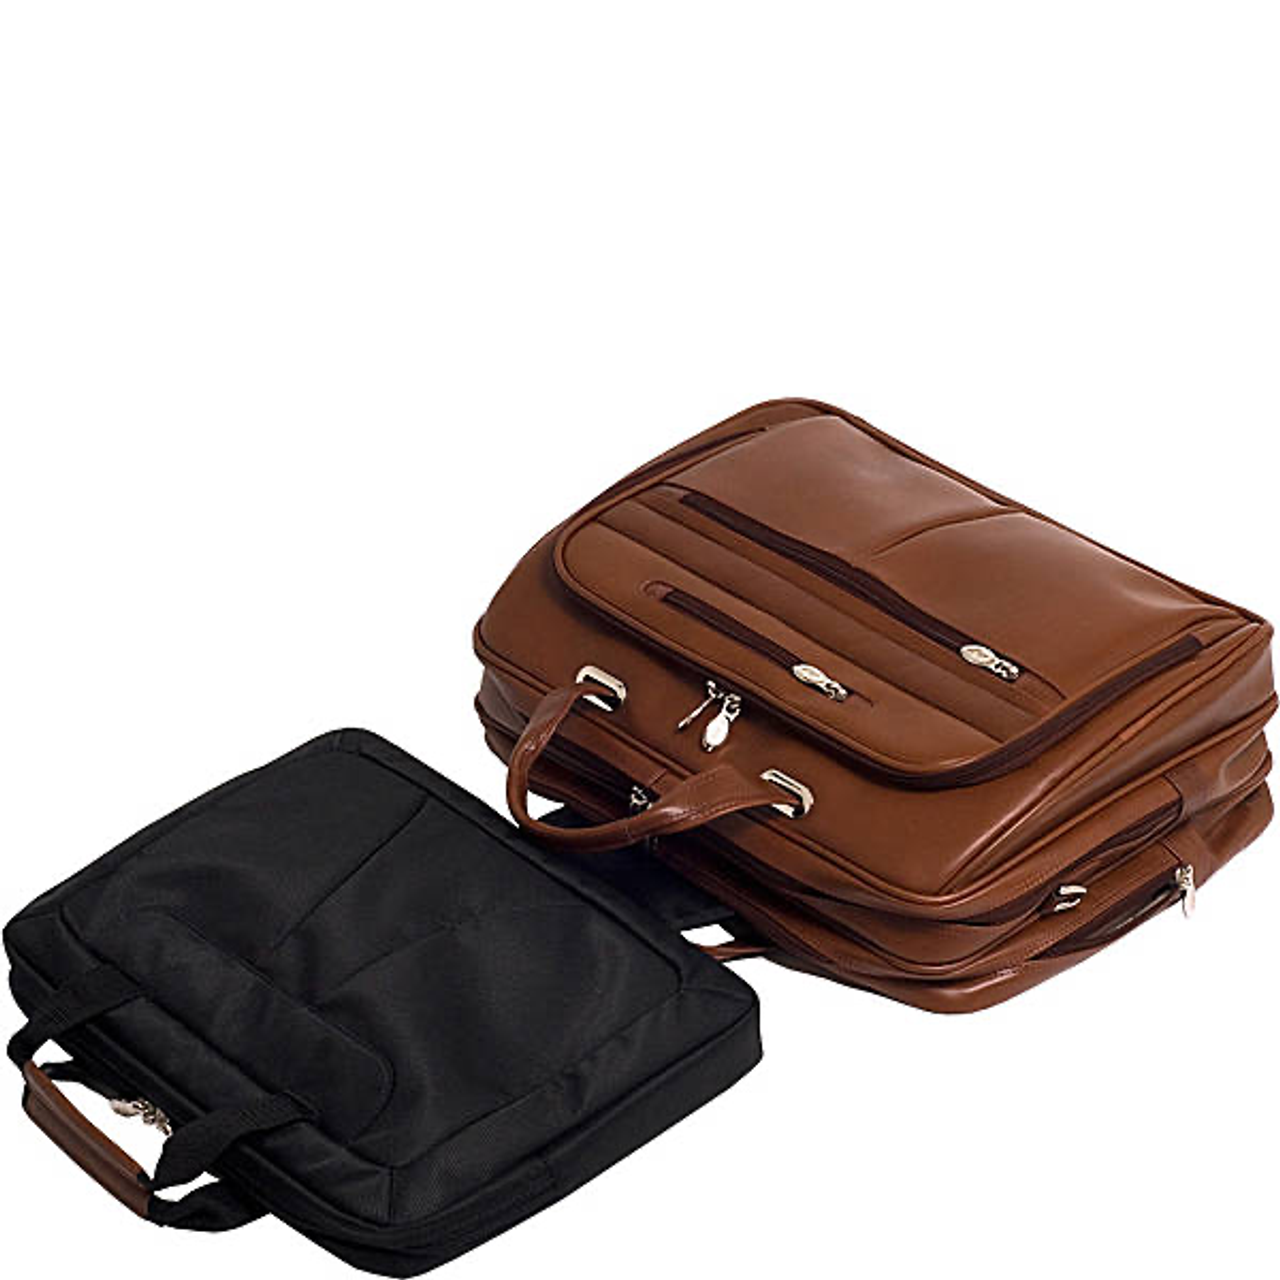 R Series Rockford Leather Laptop Case - Leather Loom